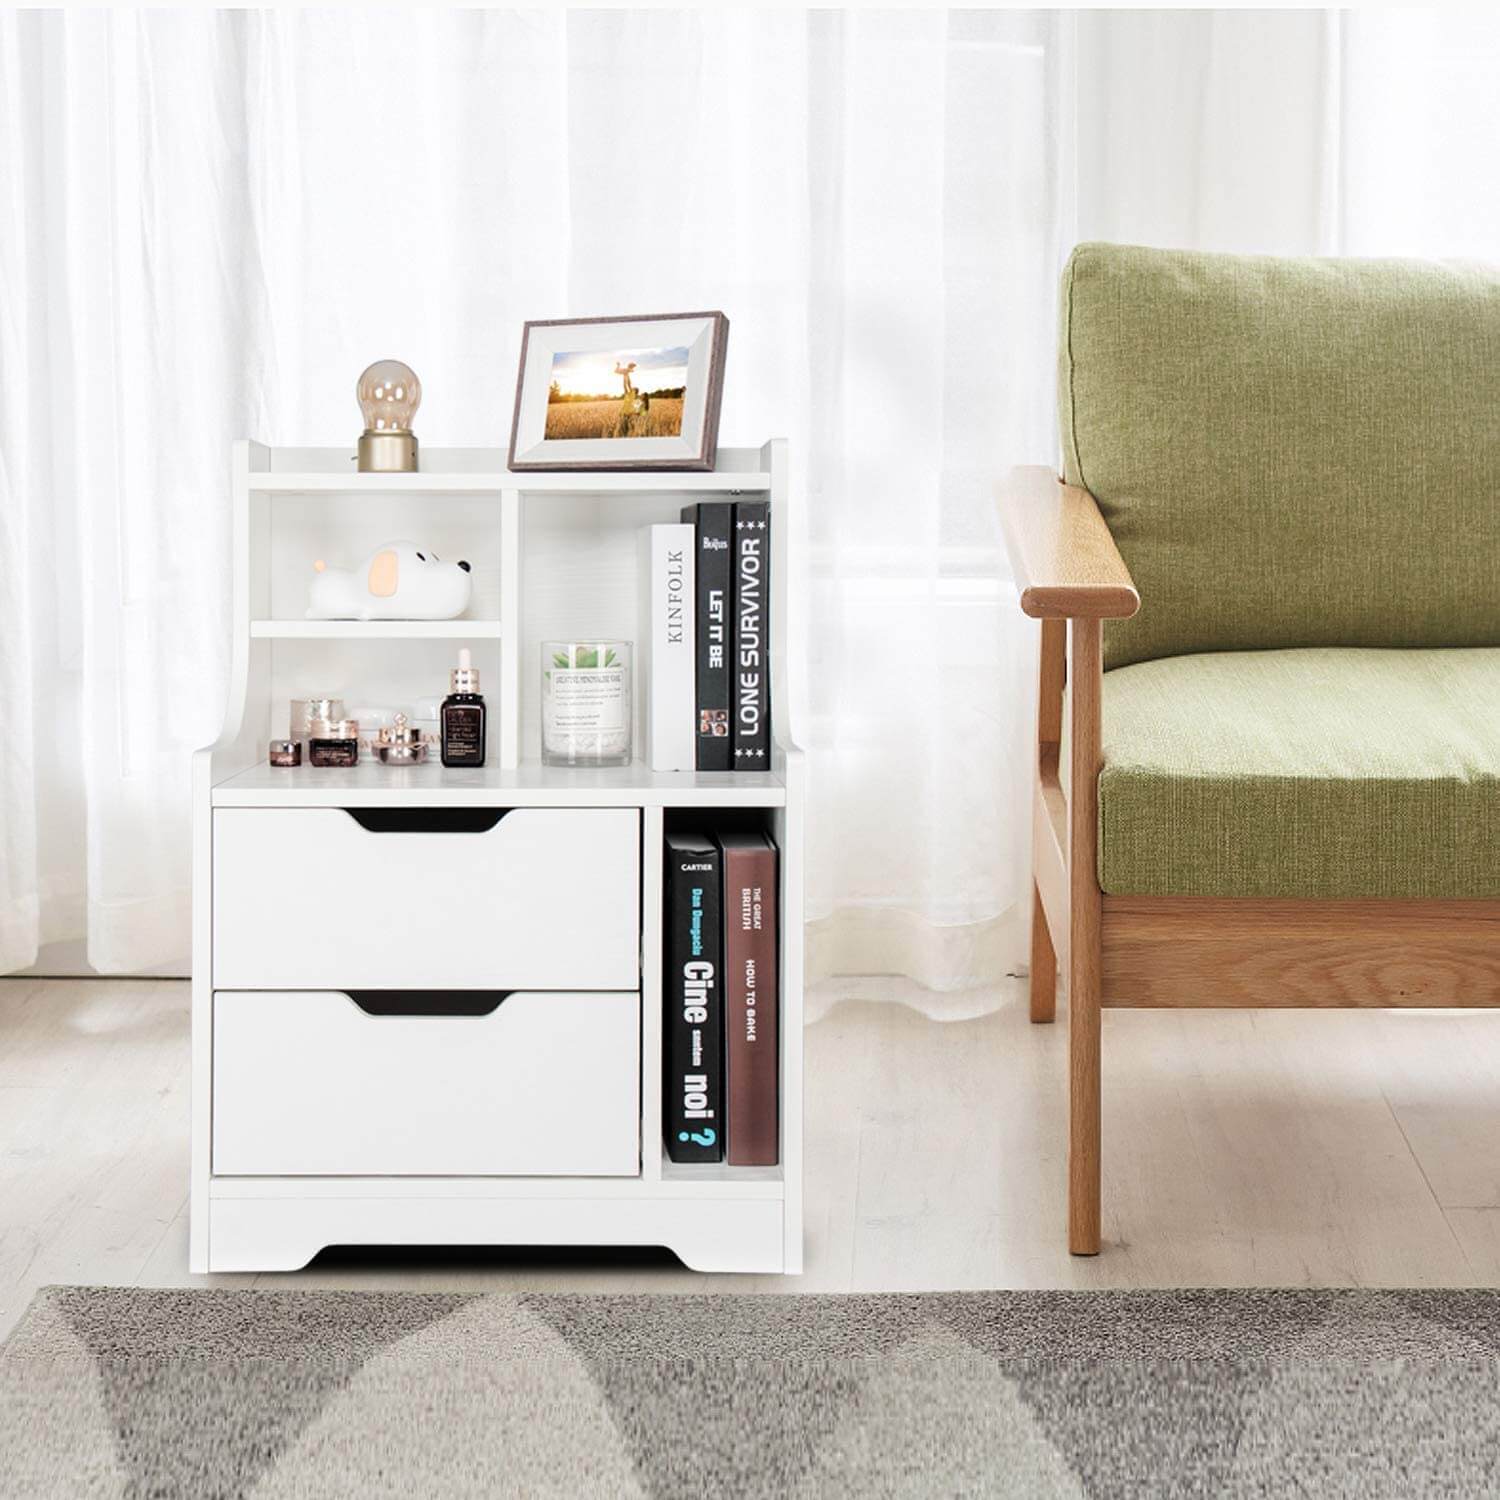 Elecwish End Tables Wood End Table Nightstand